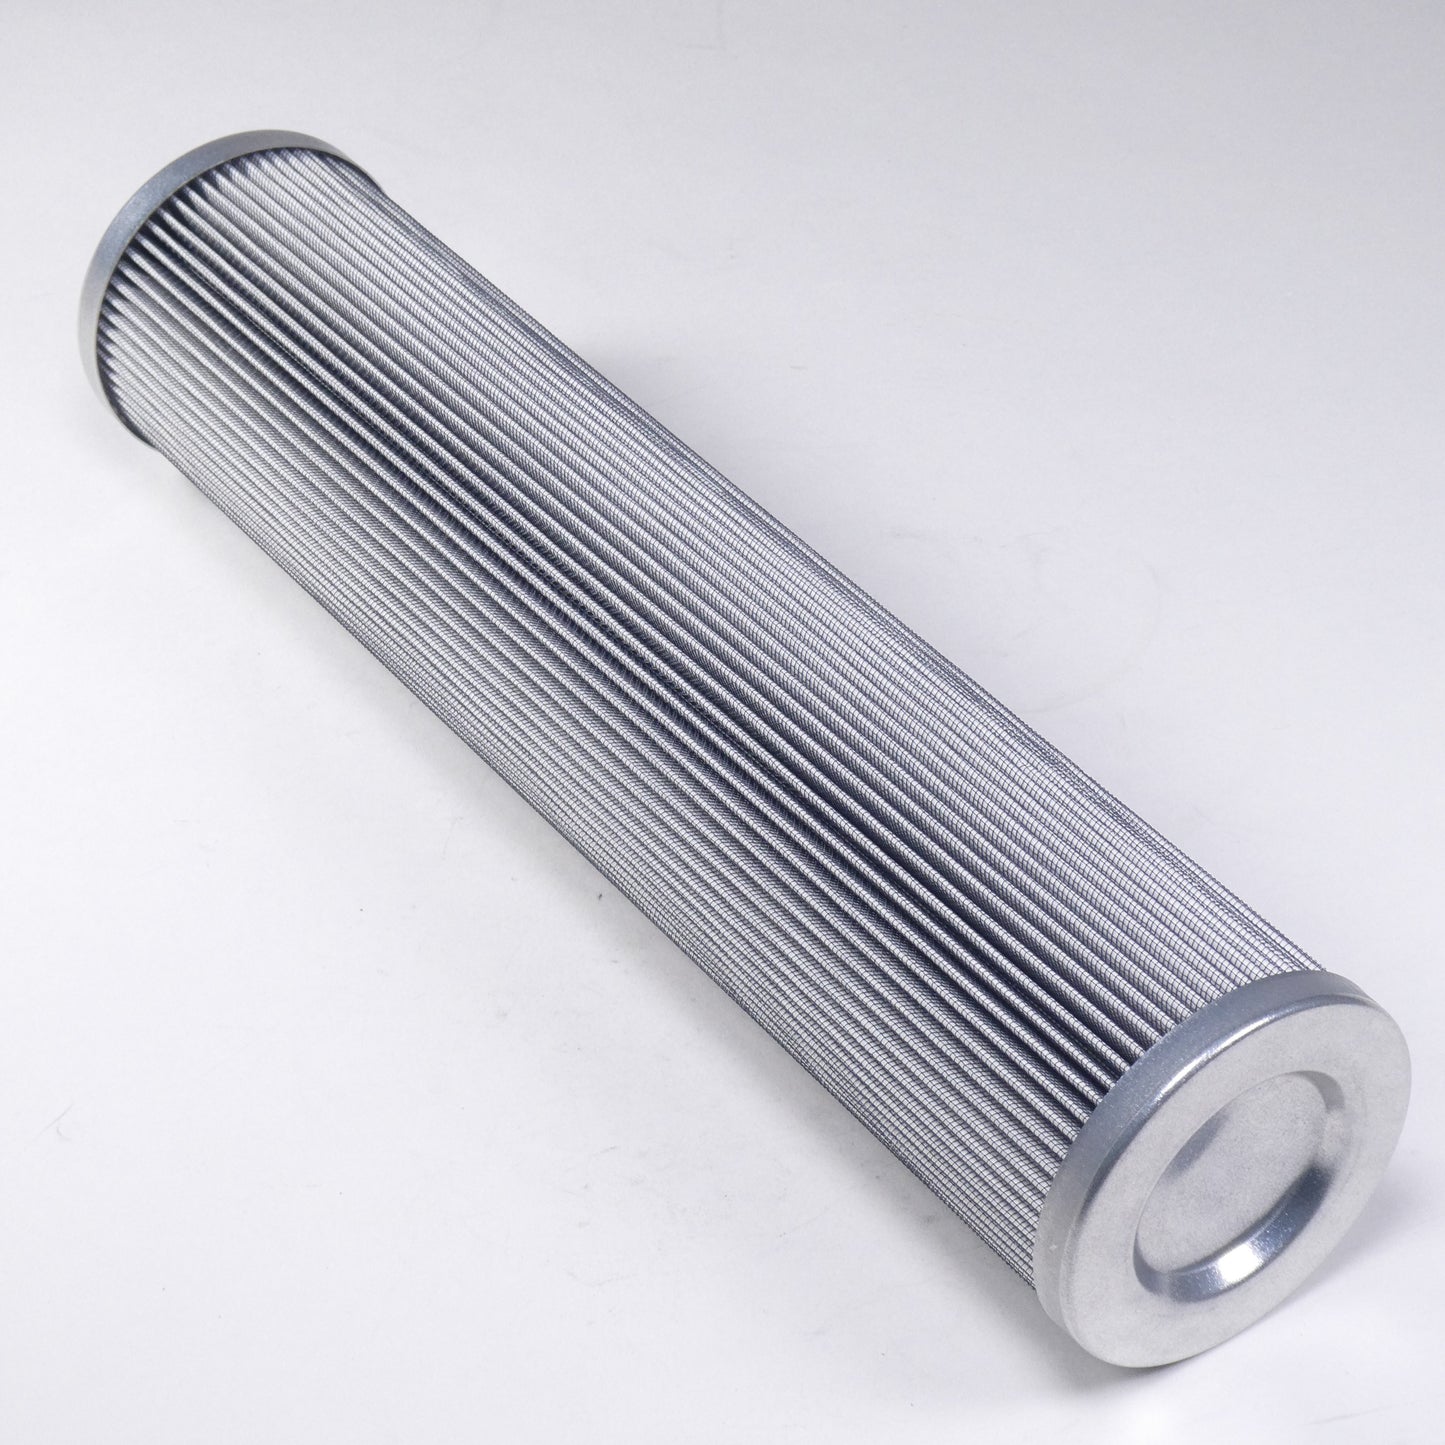 Hydrafil Replacement Filter Element for Allison Transmission 1908016